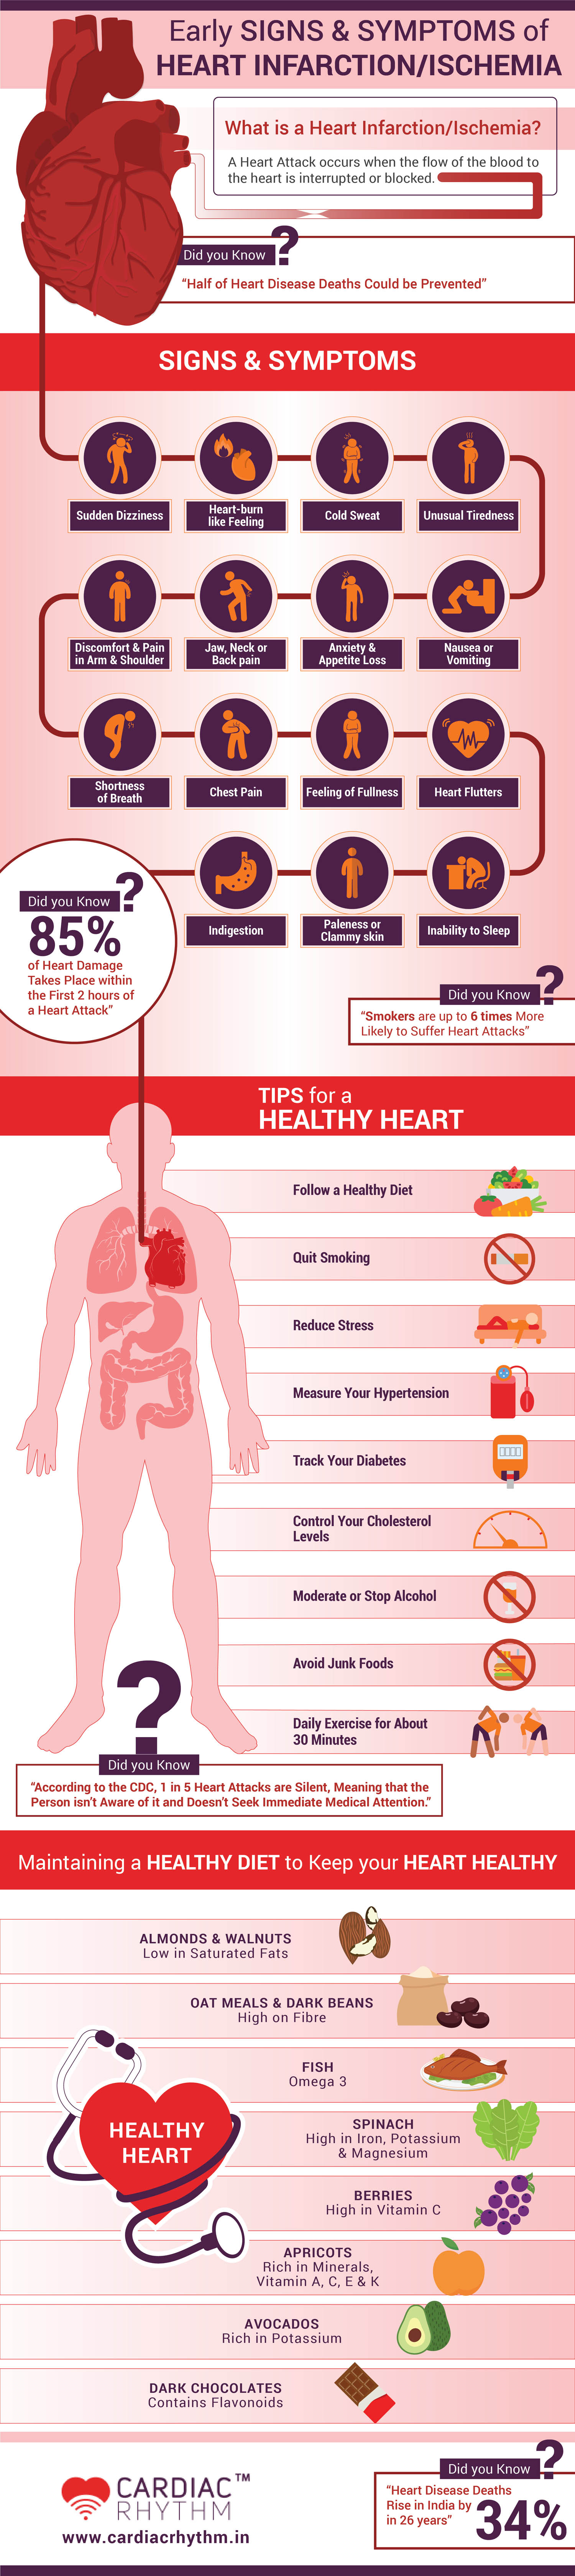 Early Signs & Symptoms of a Heart Attack